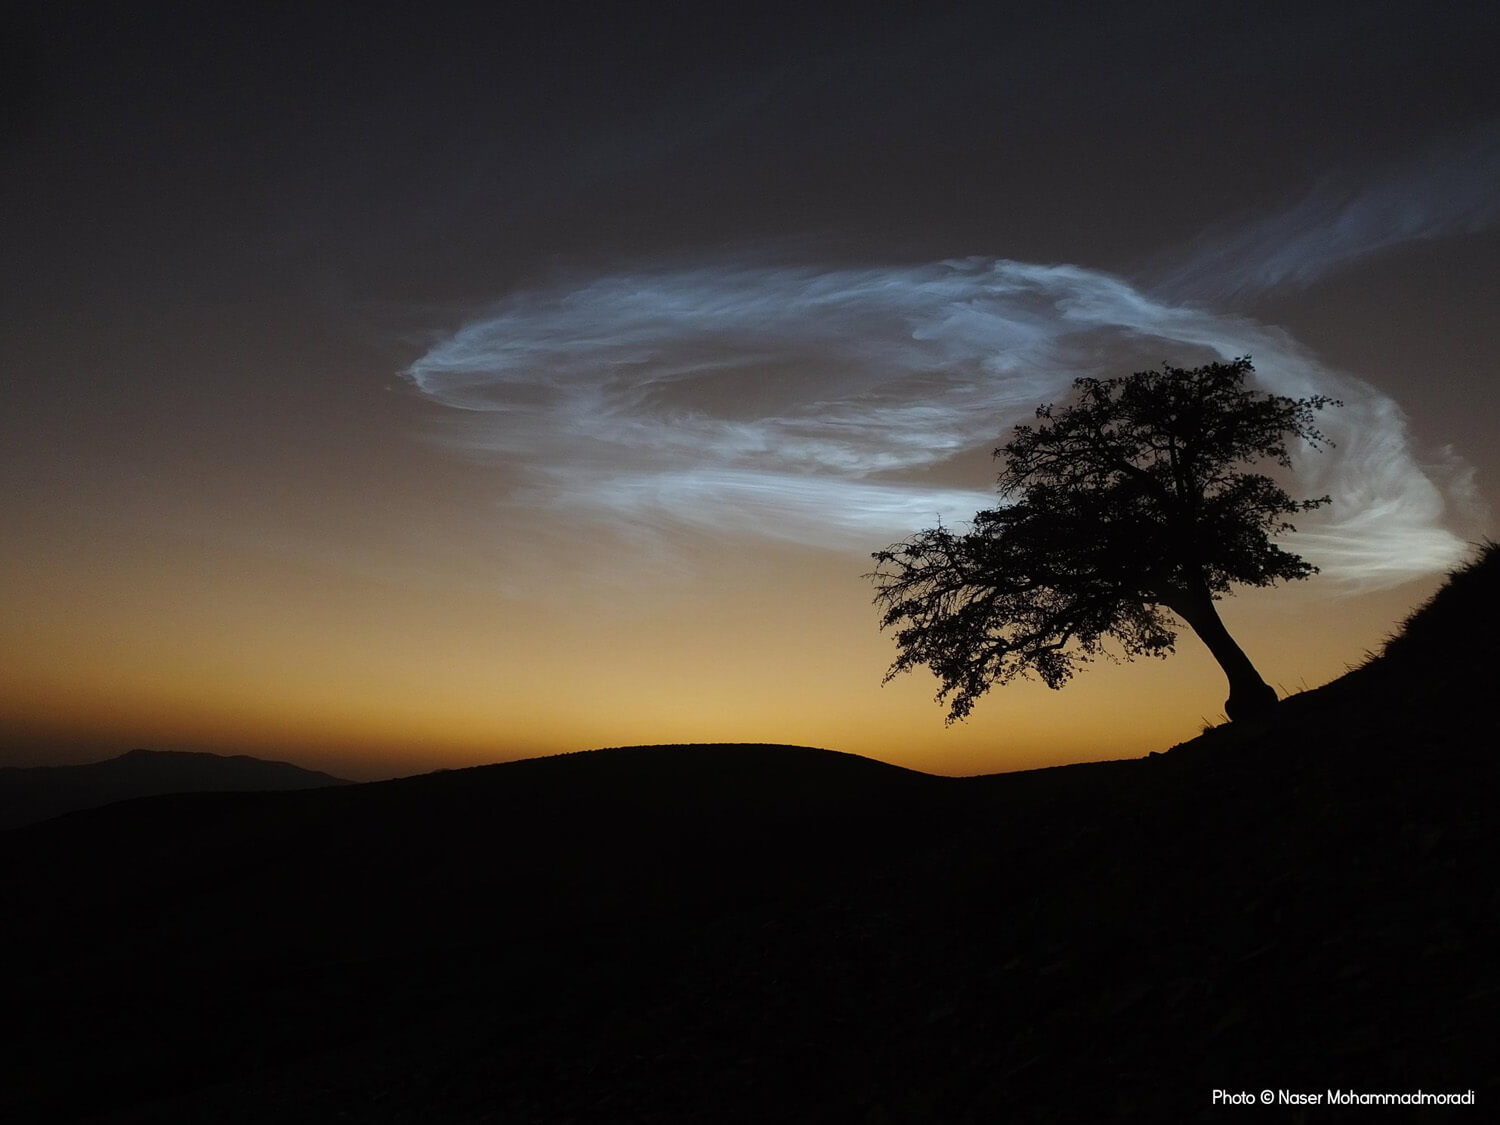 A solitary tree stands against the backdrop of a twilight sky, with a surreal, spiraling noctilucent cloud glowing above the rolling hills.